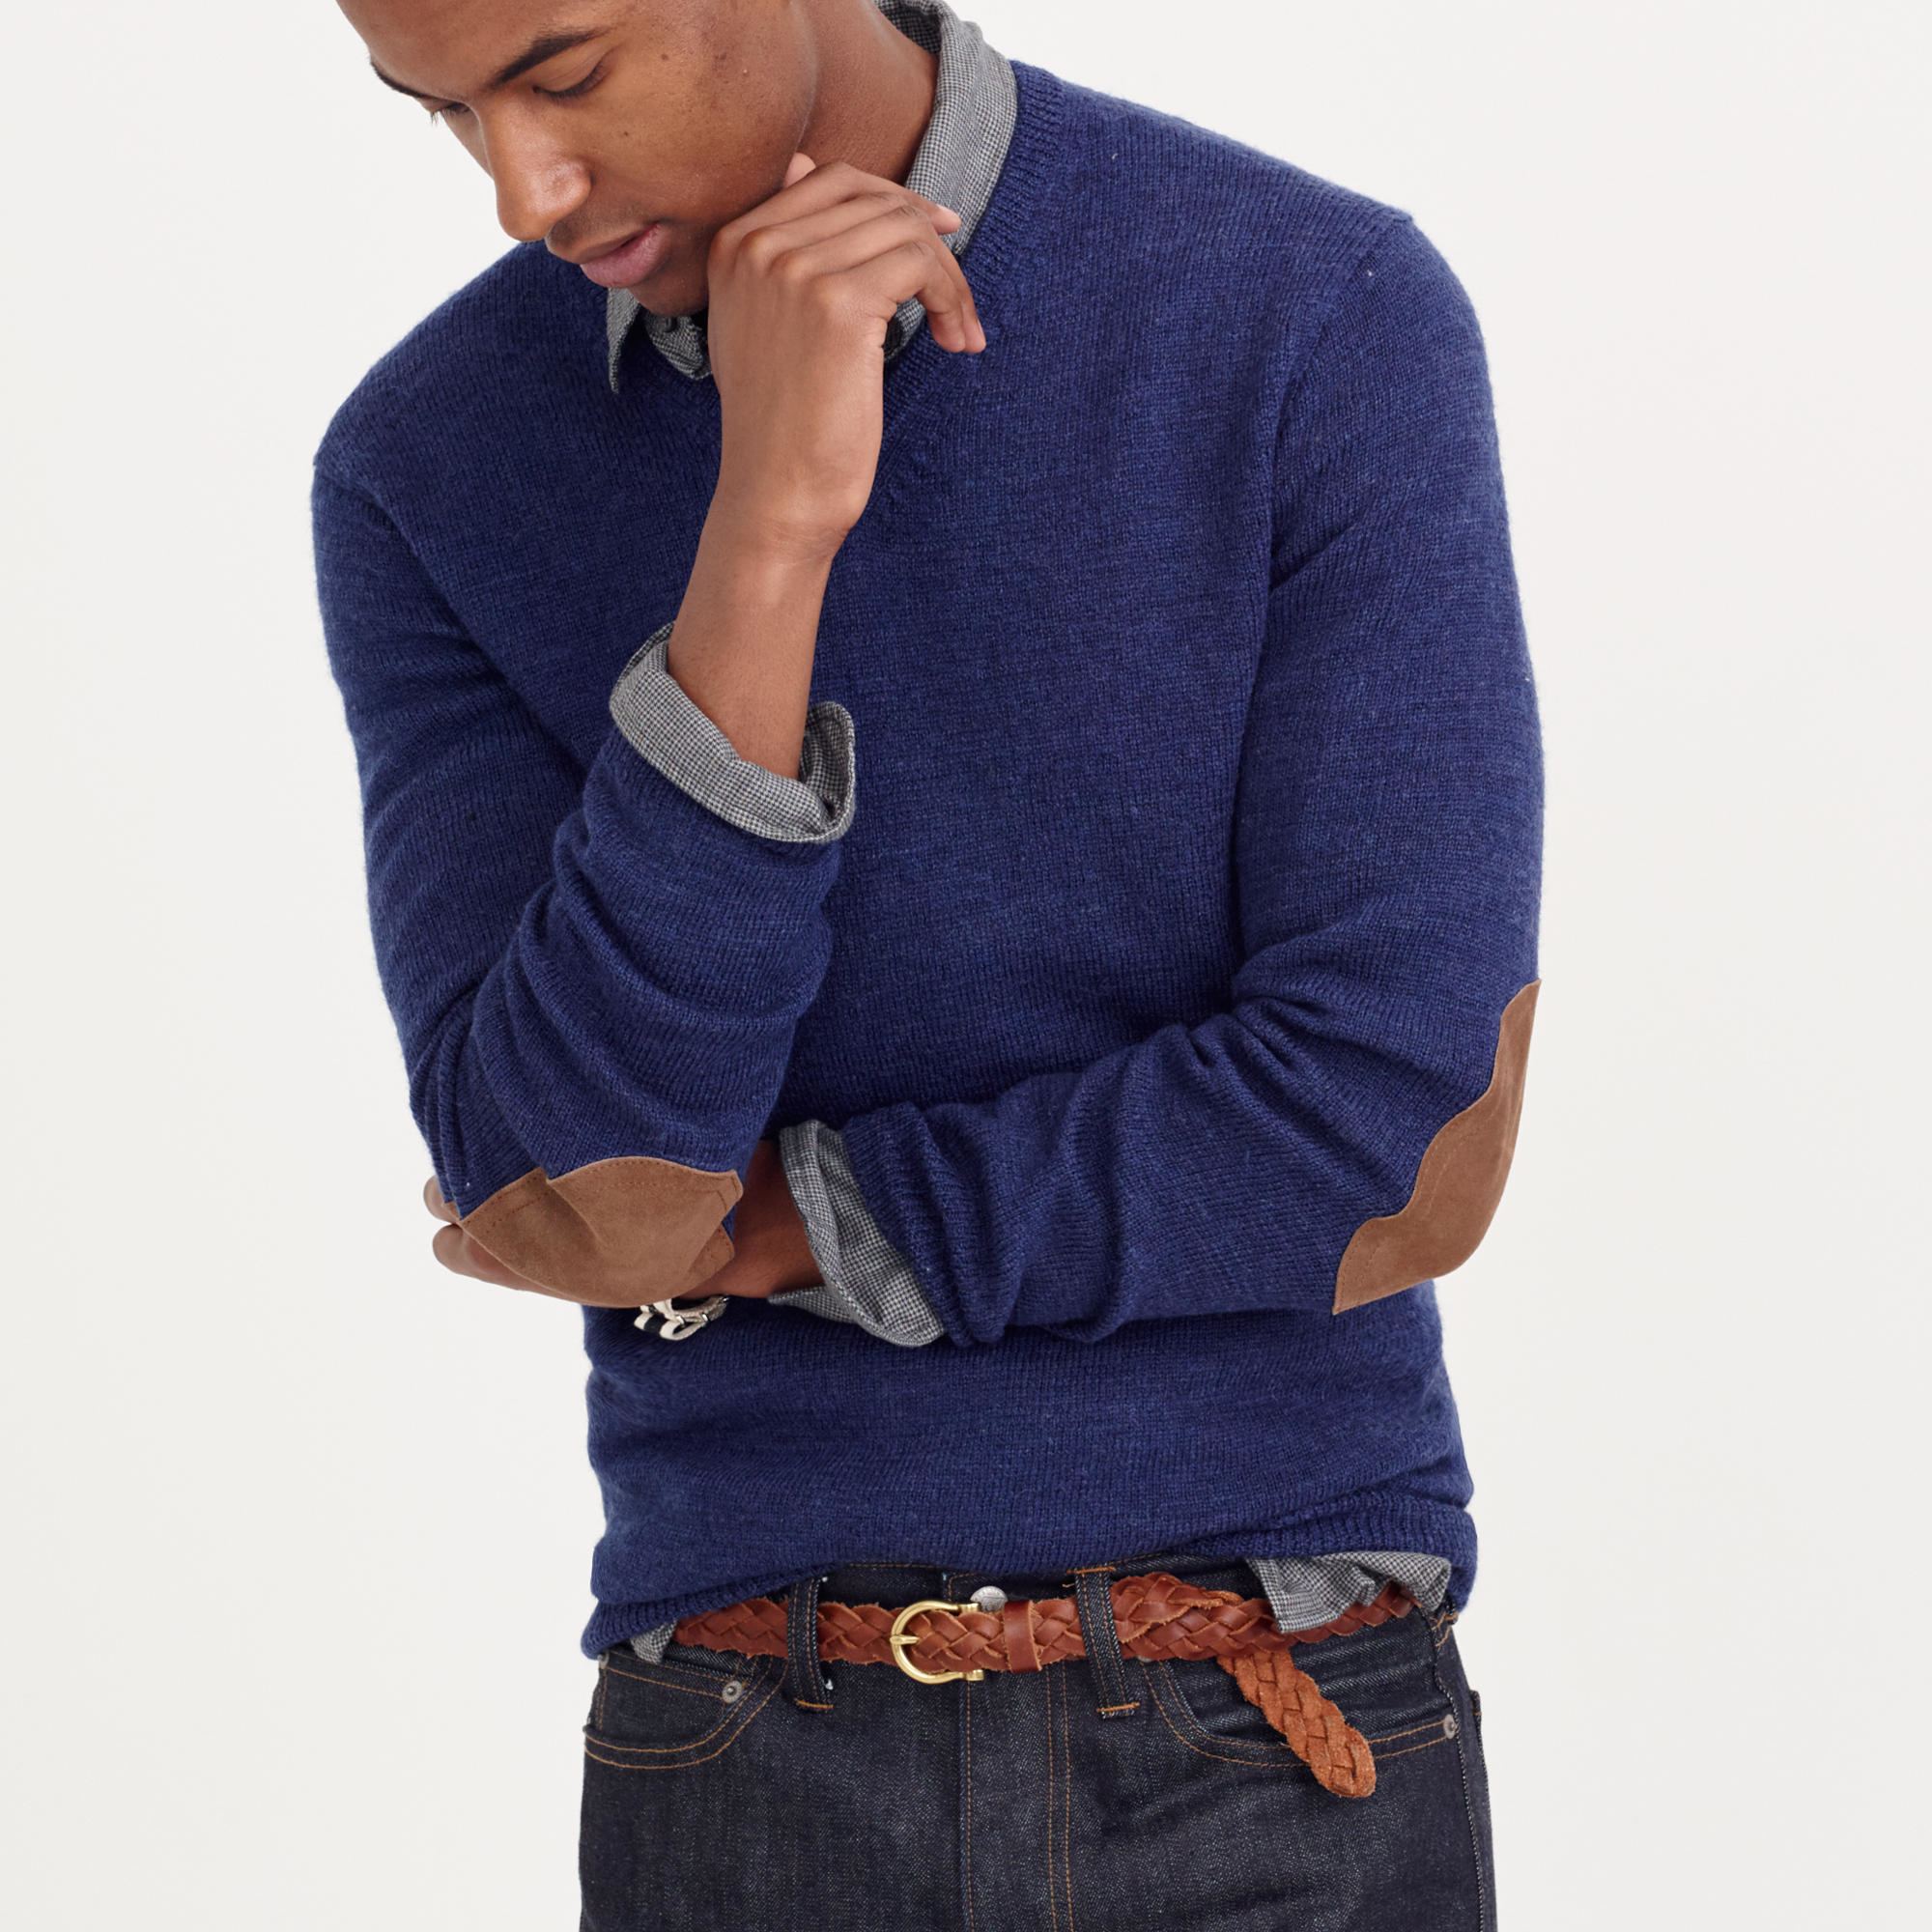 replacement elbow patches for sweaters men